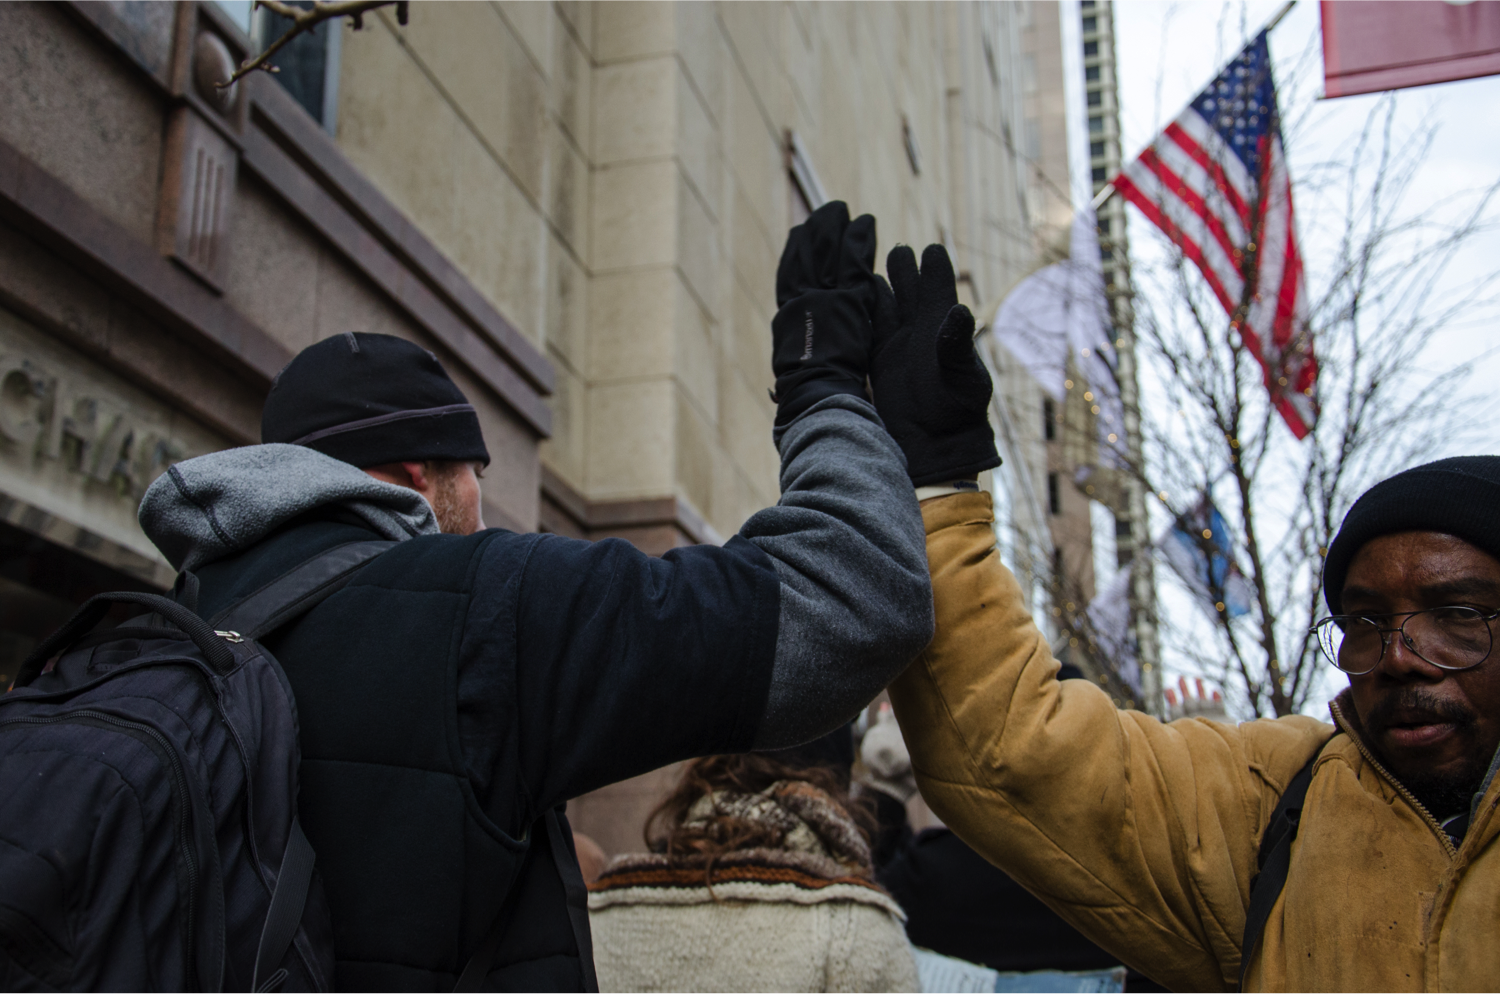 Protesters clap their hands with each other while marching on Michigan Avenue. (Jin Wu/Medill)